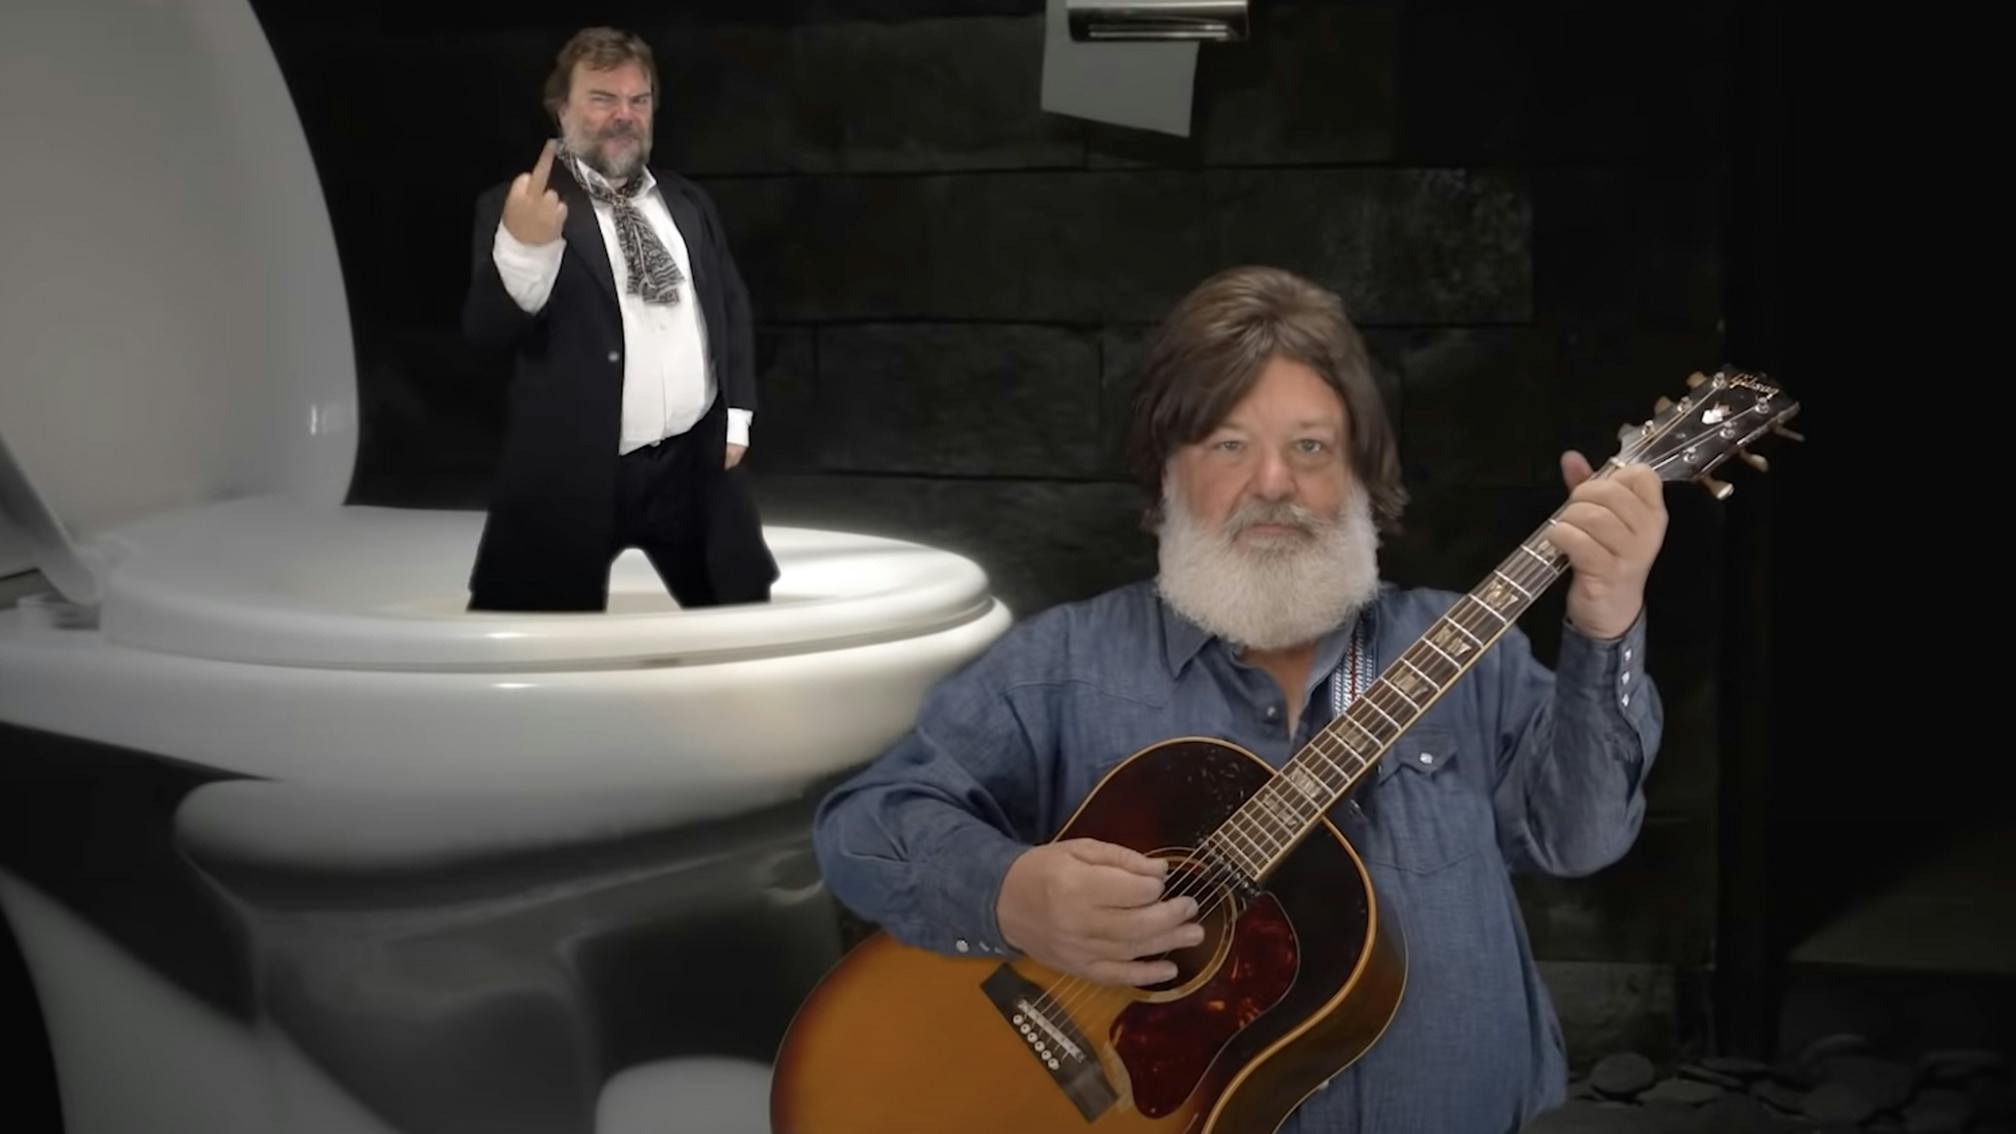 Tenacious D pay *tribute* to The Beatles with hilarious, Paul McCartney-approved medley